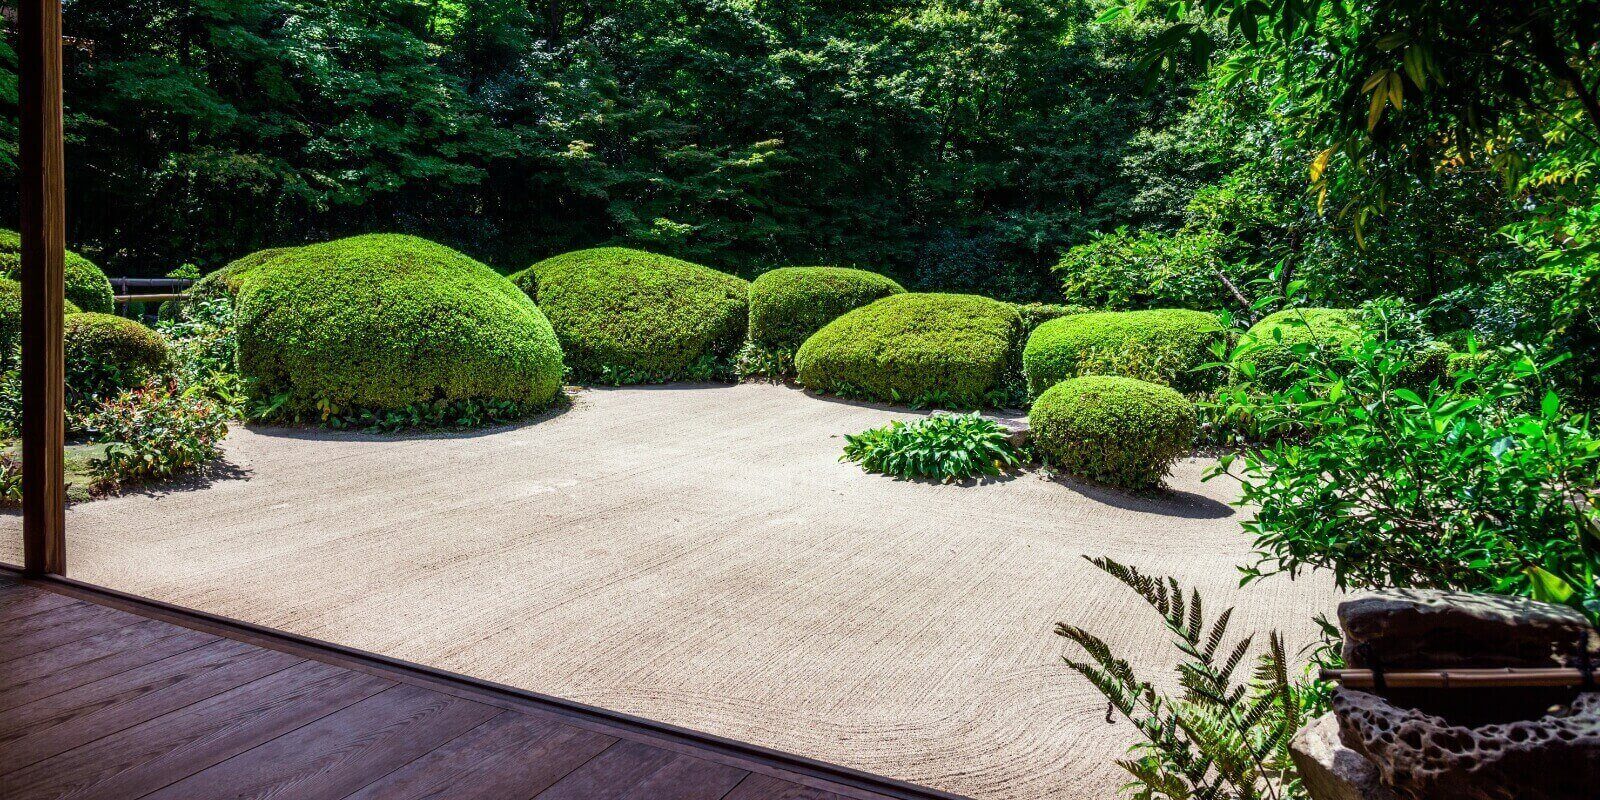 Creating a garden decorated with tradition and master craftsmanship.